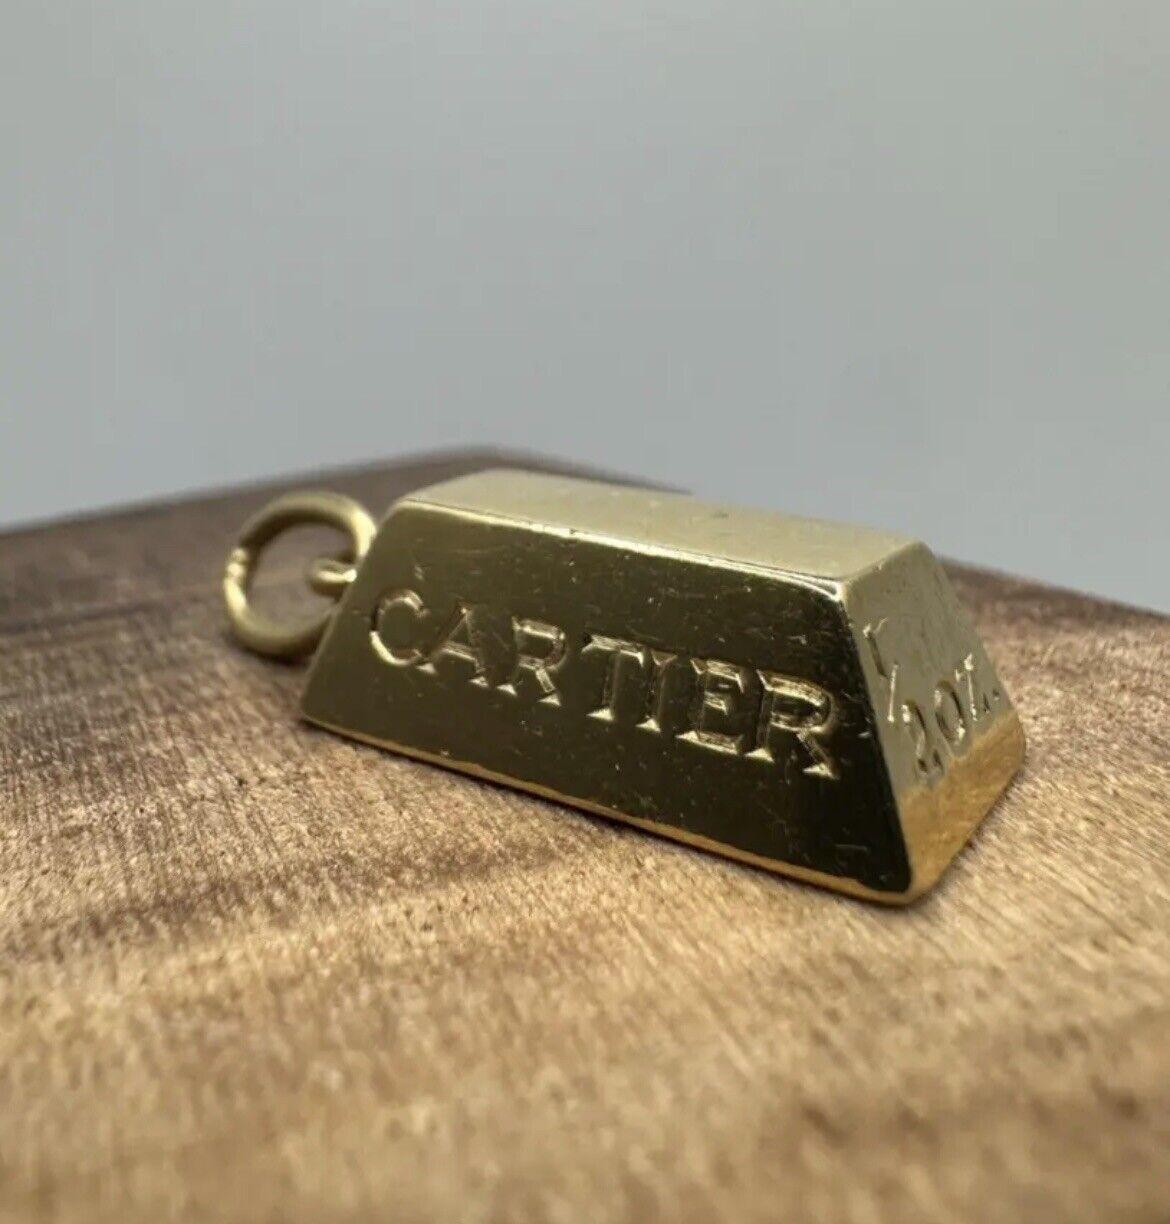 Cartier 18k Yellow Gold 1/z Oz Ingot Bar Charm Pendant Vintage Circa 1970s

Here is your chance to purchase a beautiful and highly collectible designer pendant.   

Made by Cartier in the 1970s, these ingot charms represent a gold bar! This one is